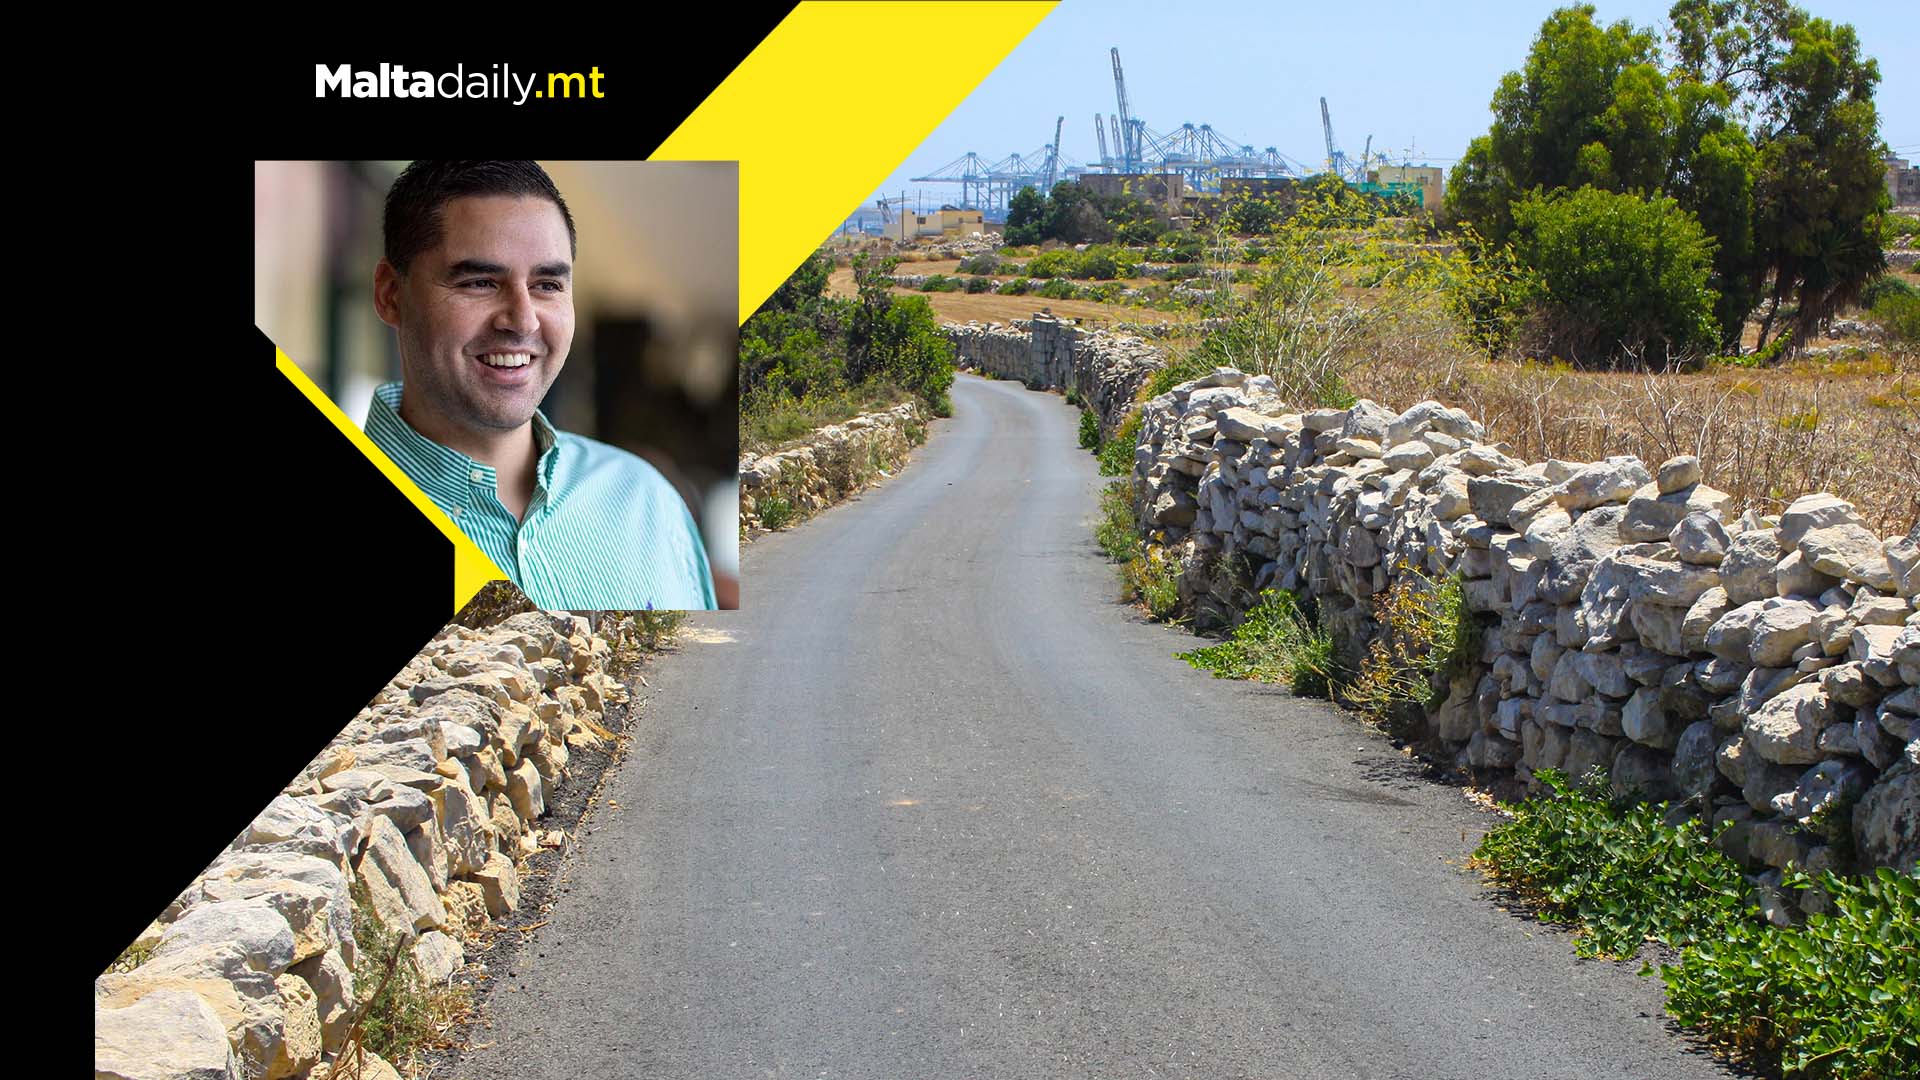 Around €12.5 million invested to improve 100 rural roads last year